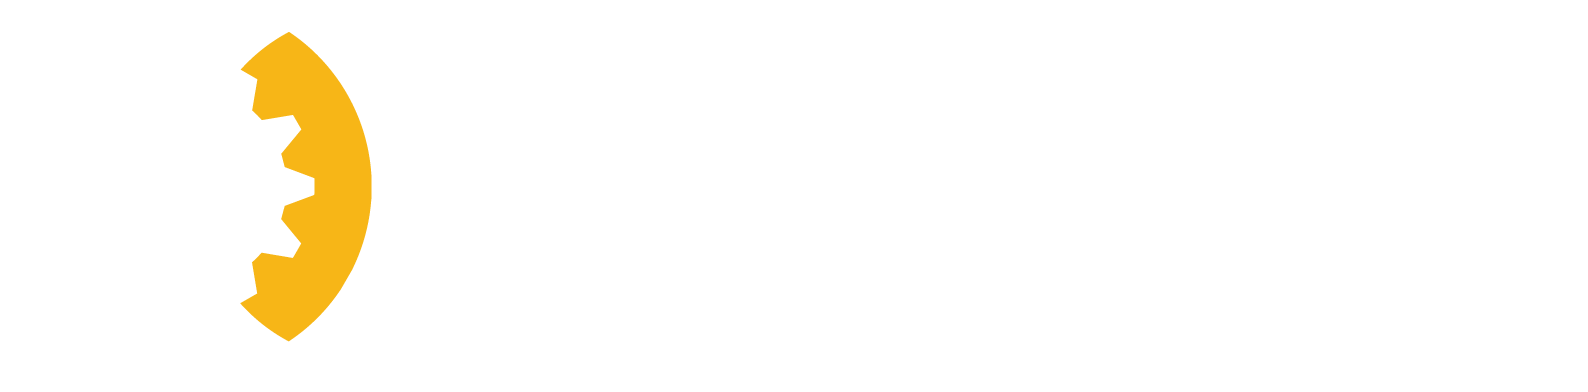 ideal gear powered by boundary